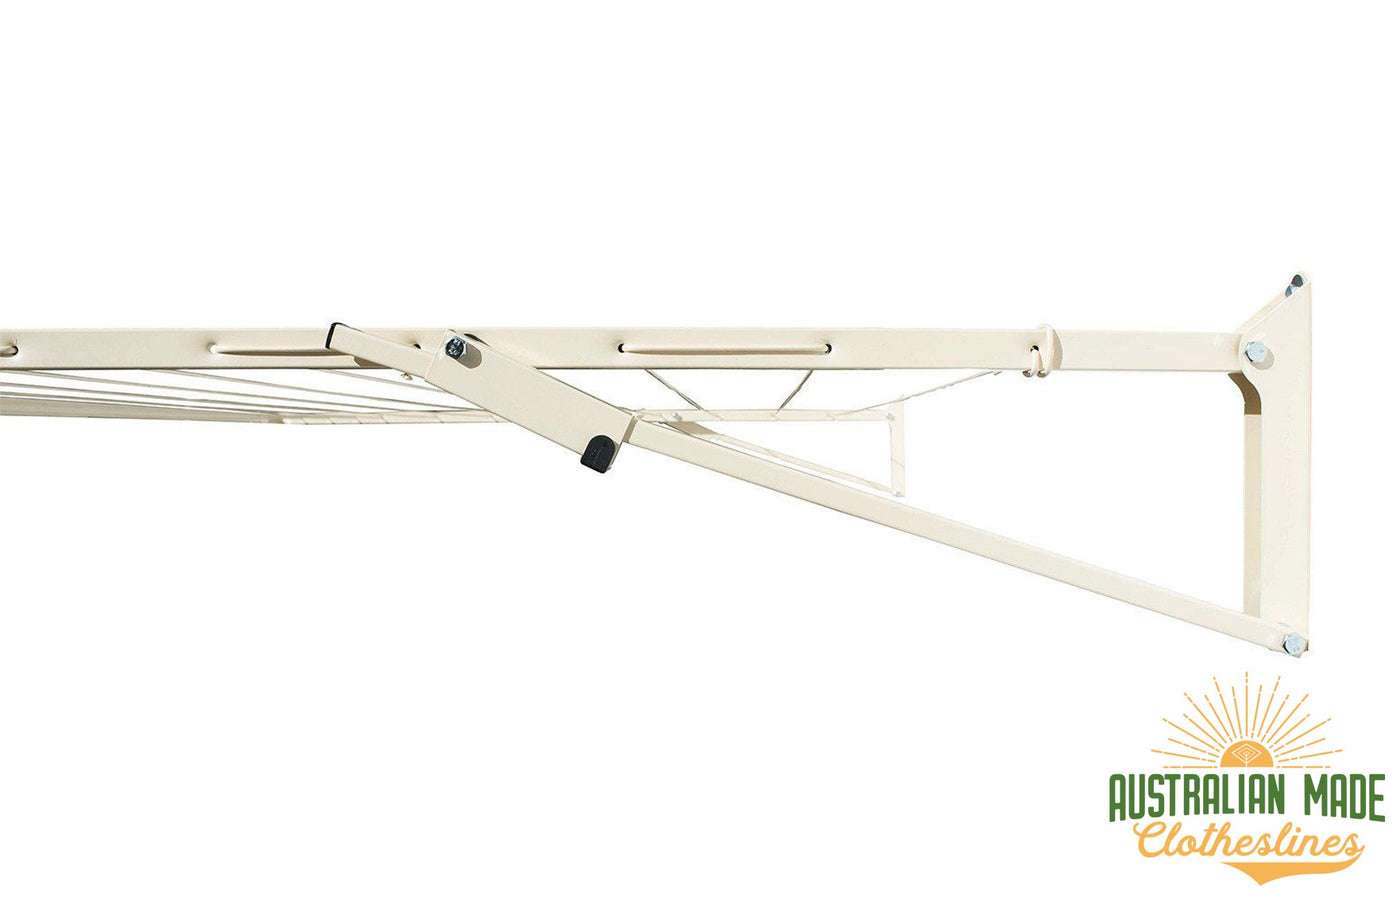 Austral Standard 28 Clothesline - Classic Cream Close Up Right Side View - Australian Made Clotheslines